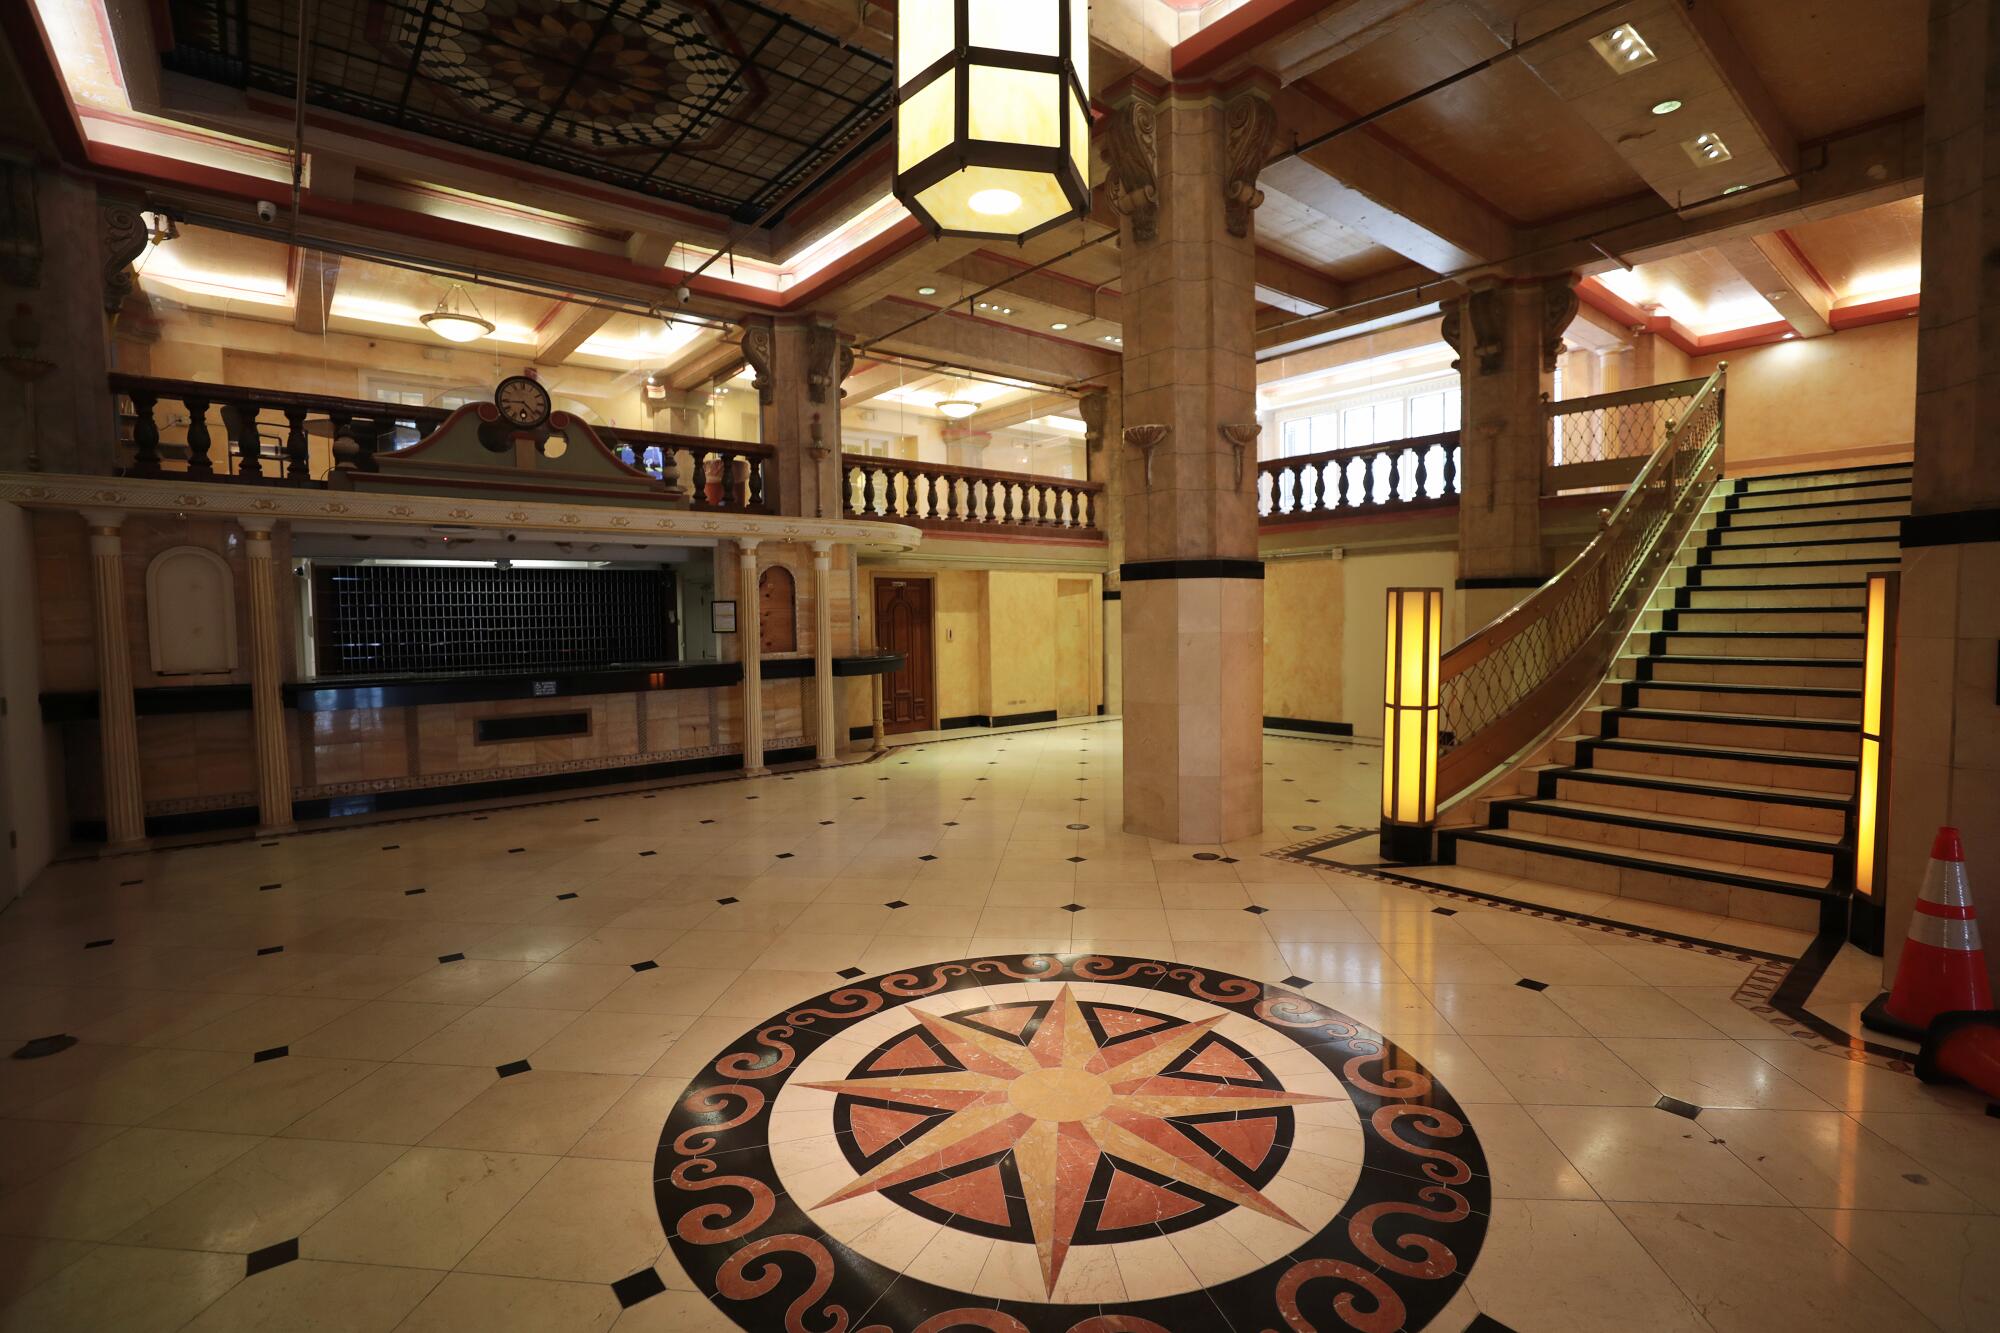 The lobby of the Cecil Hotel